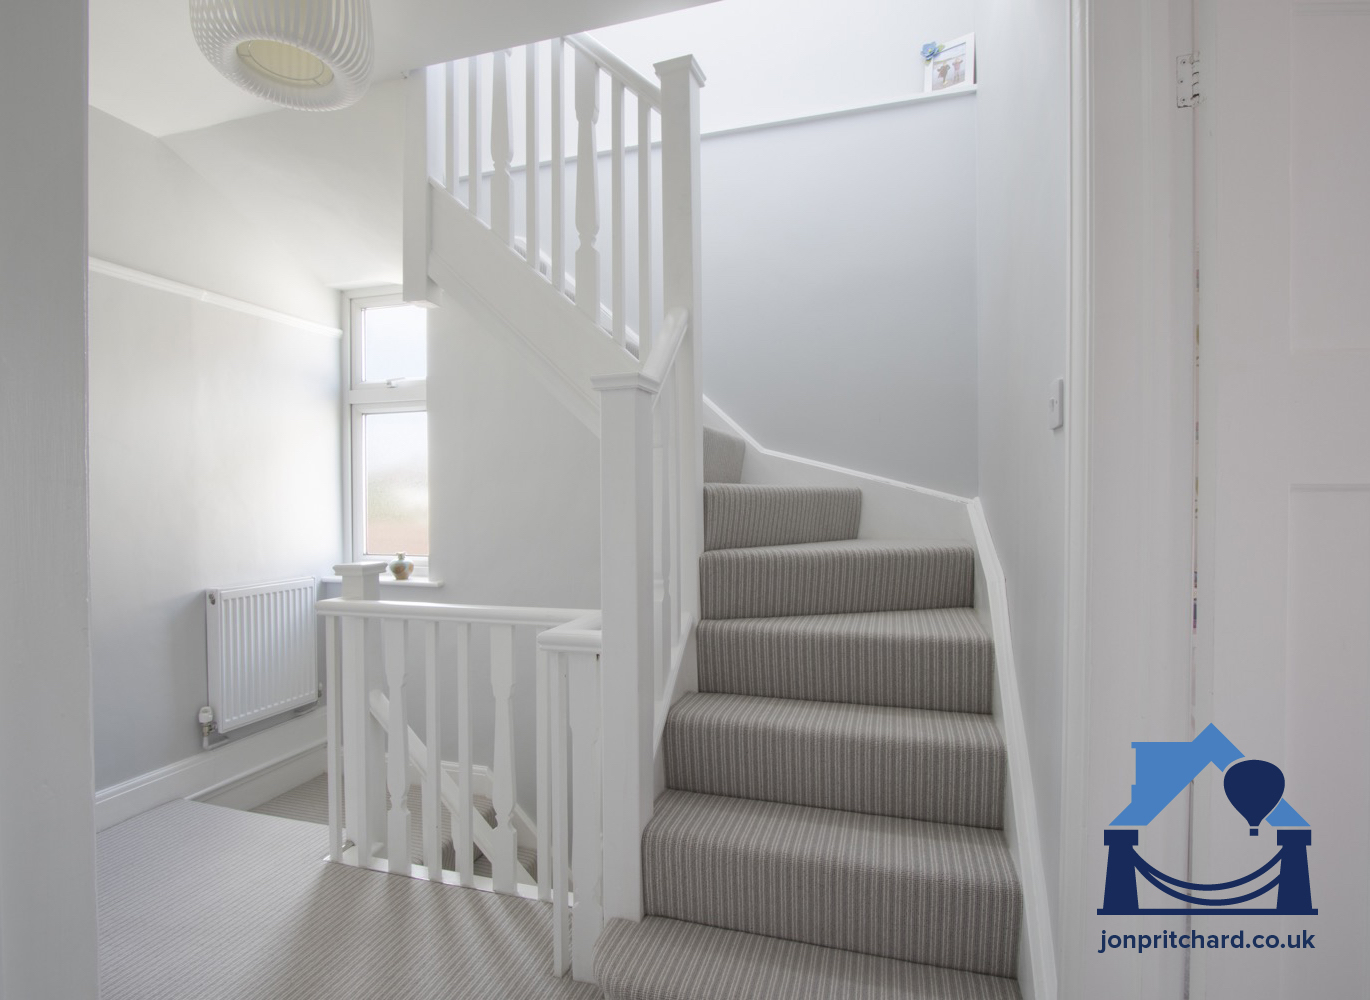 stairs leading up to a bright Jon Pritchard loft conversion in Bristol UK